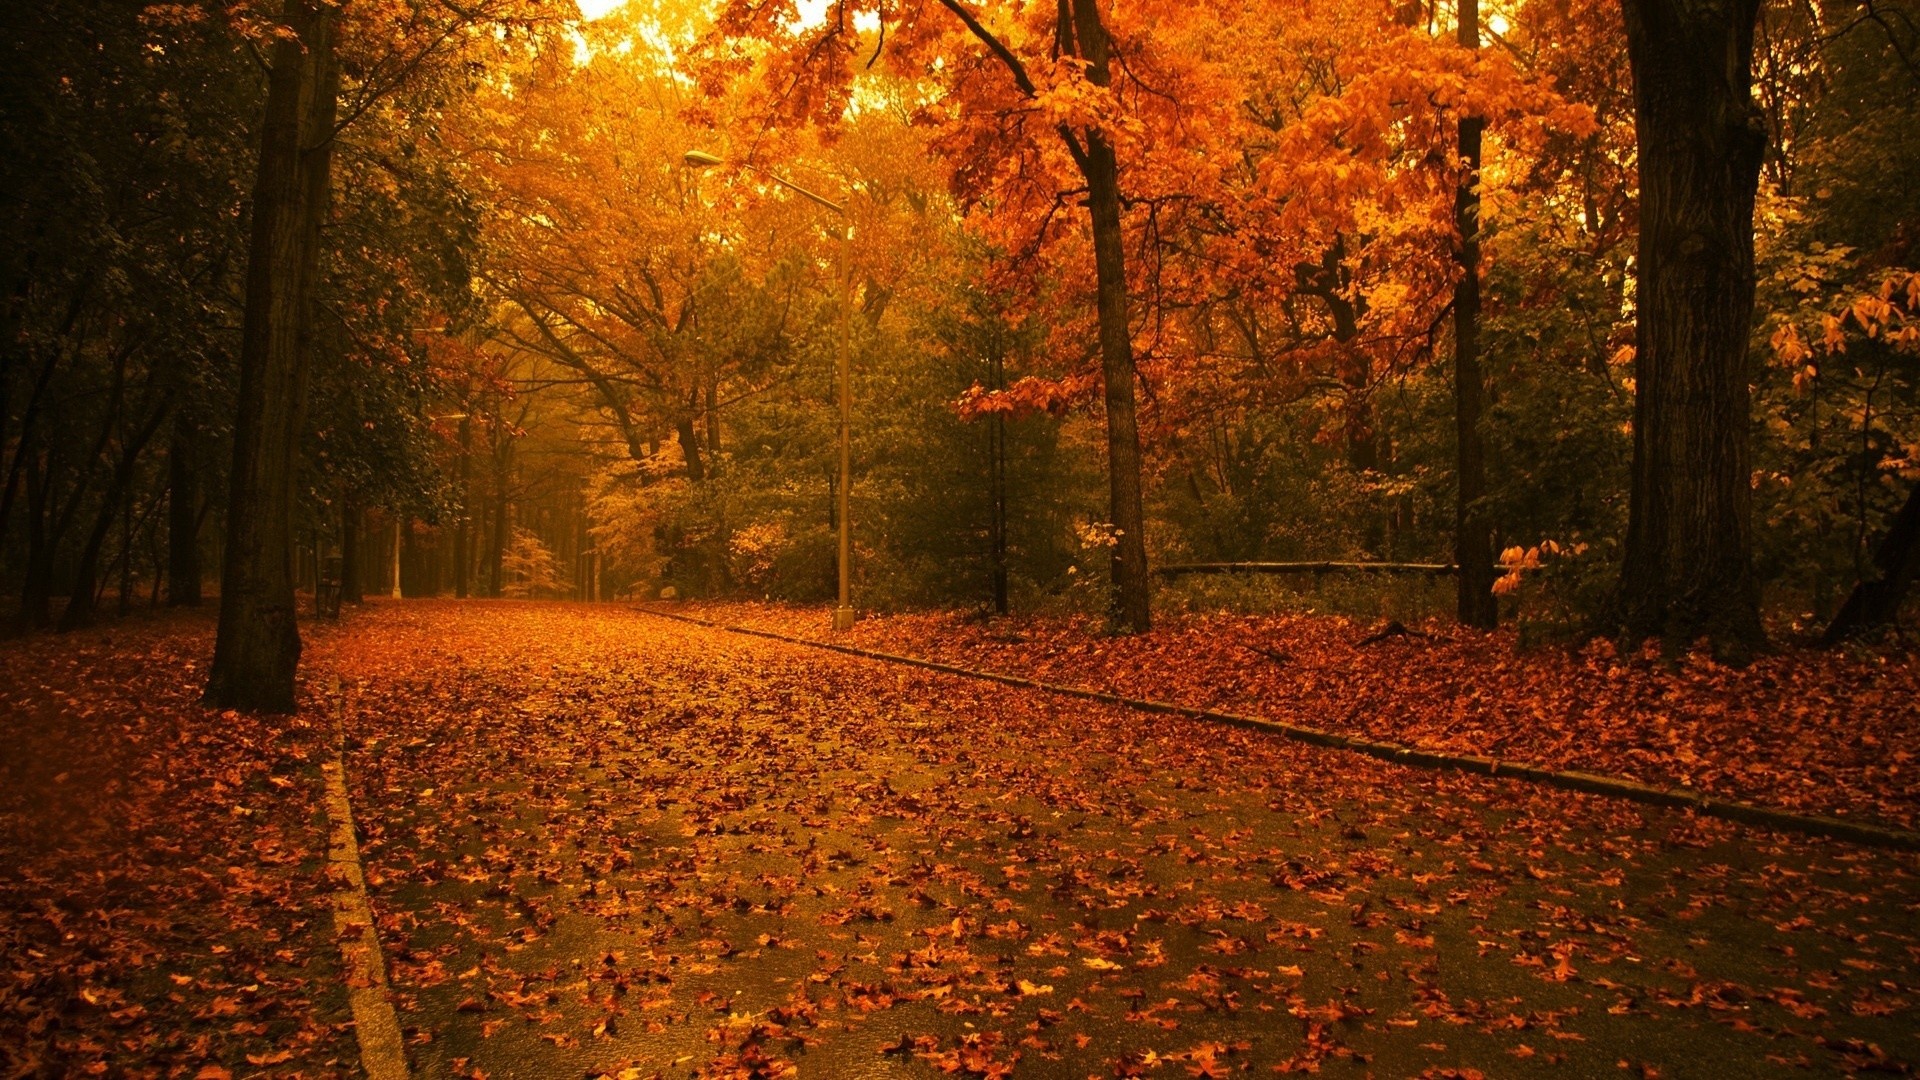 1920x1080 Nature's Seasons images Trees in autumn HD wallpaper and background photos